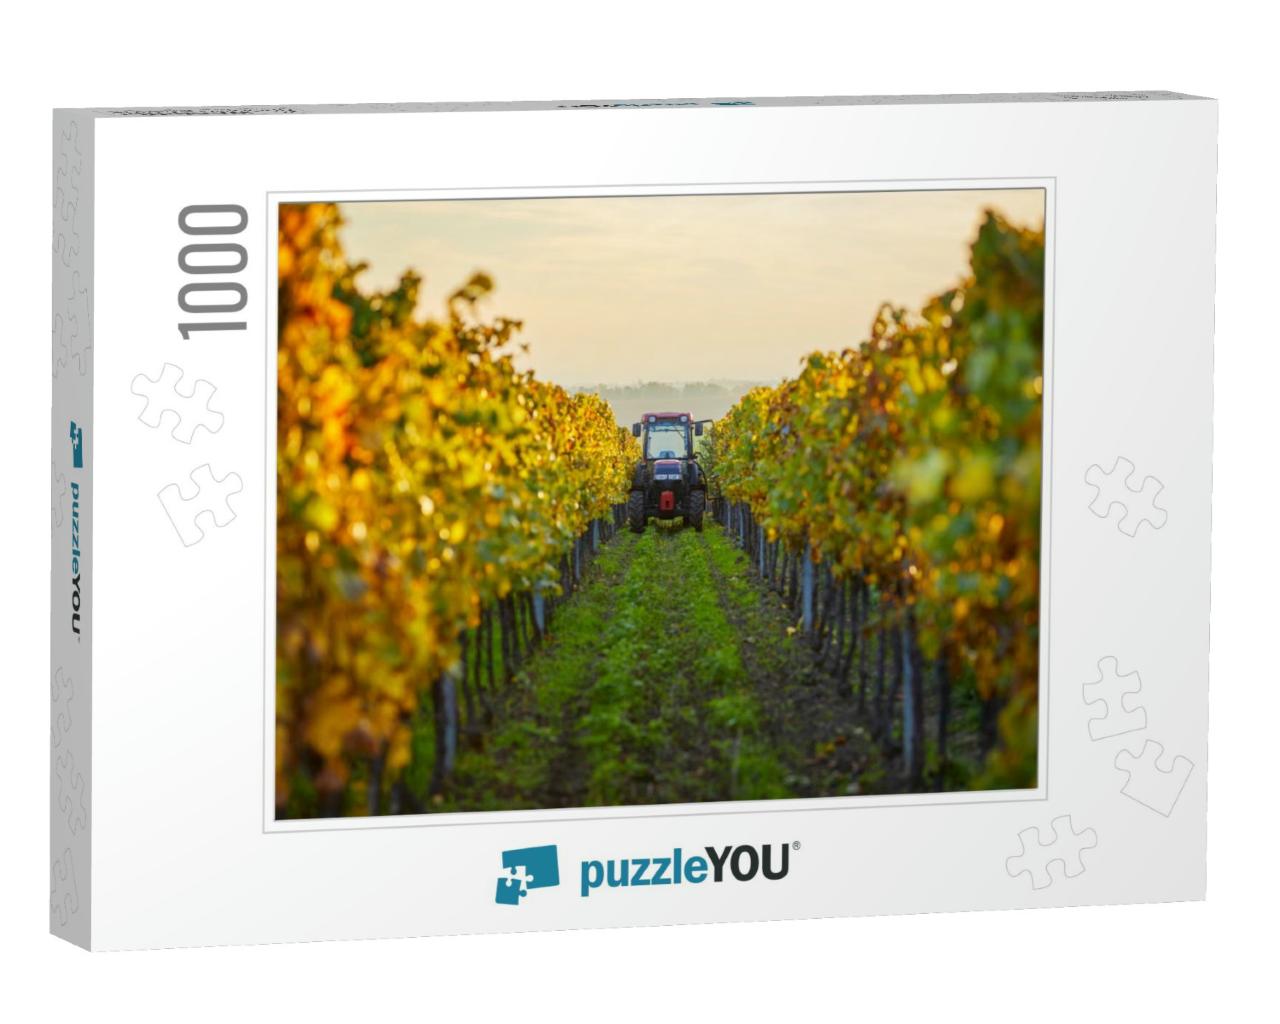 Autumn Rows of Vineyards with Tractor... Jigsaw Puzzle with 1000 pieces